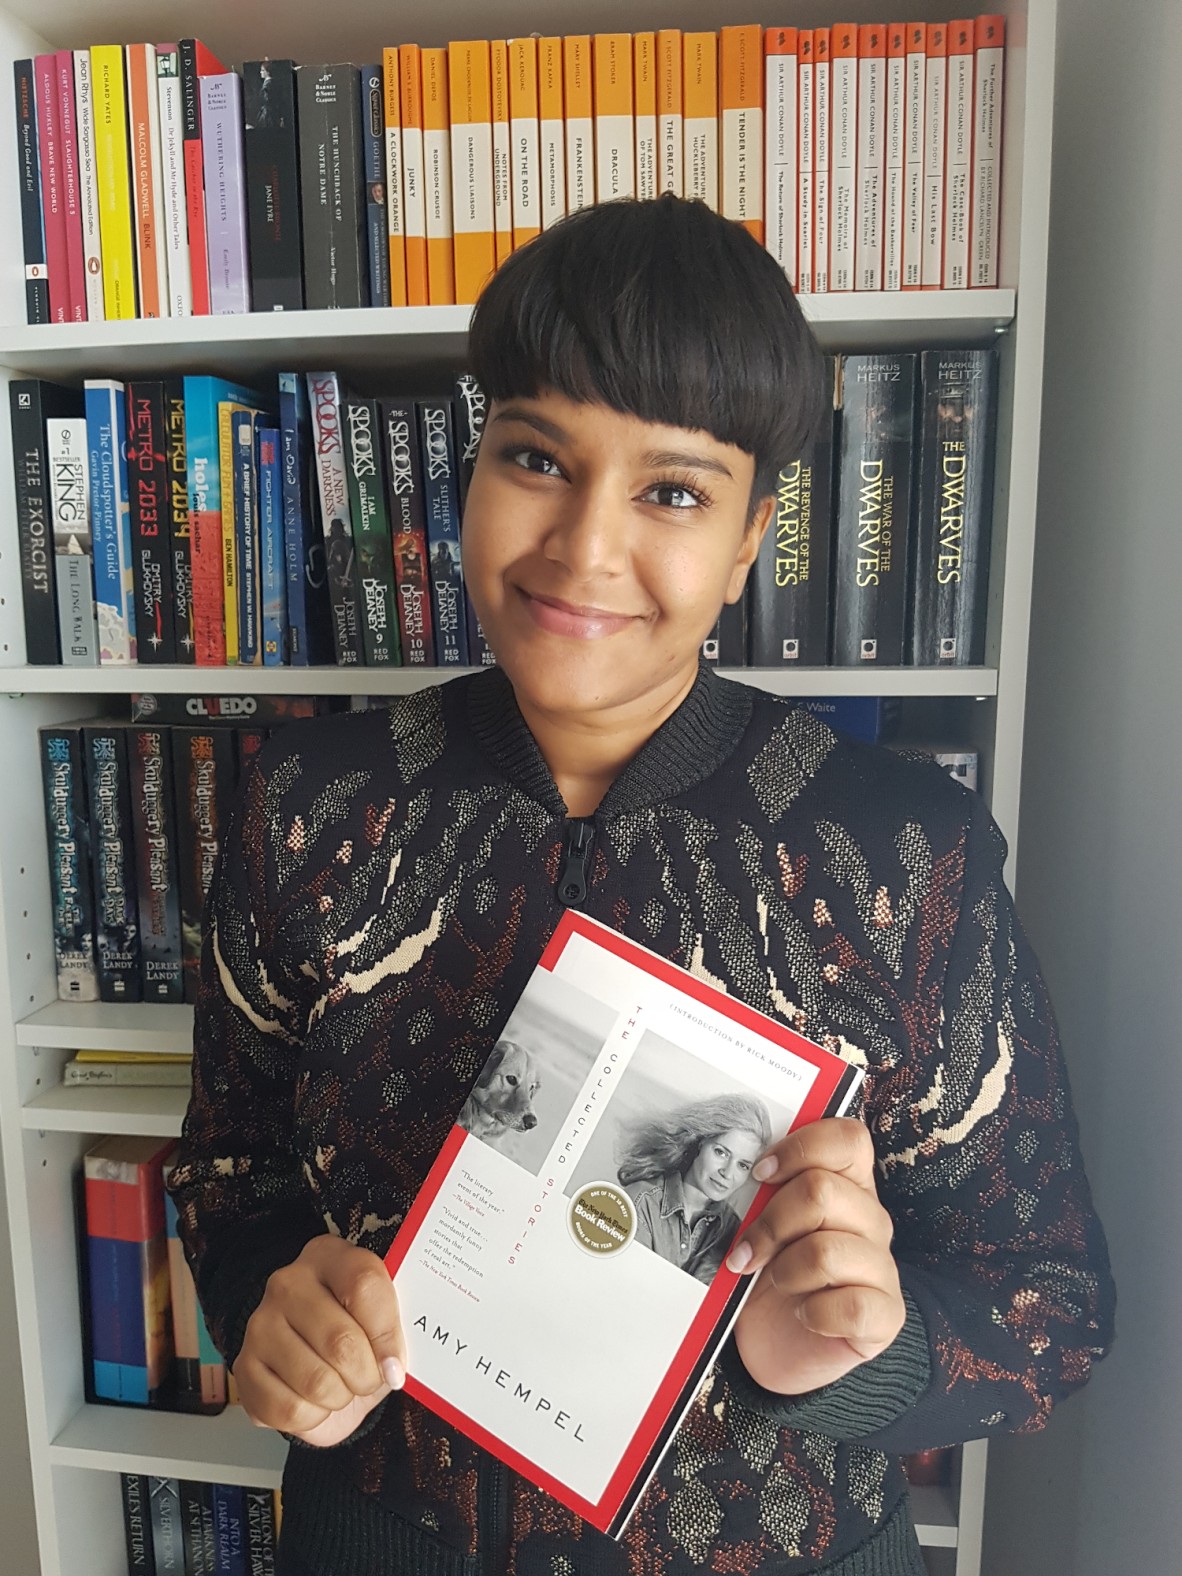 Shastra Deo smiling and holding Amy Hempels book The Collected Stories